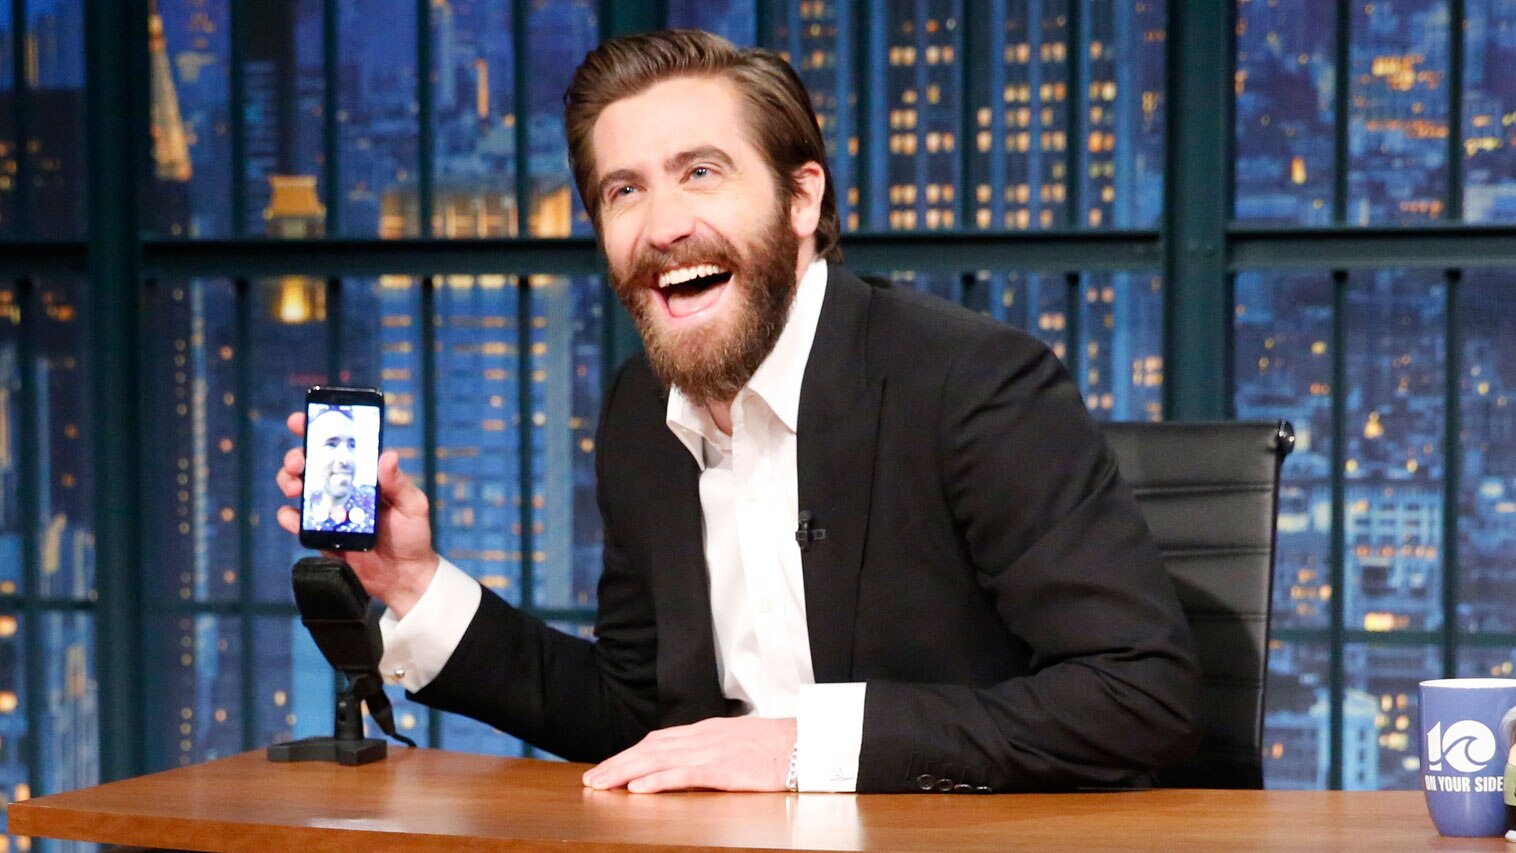 Jake Gyllenhaal clears the record: He never made out with Seth Meyers' wife  – Metro US